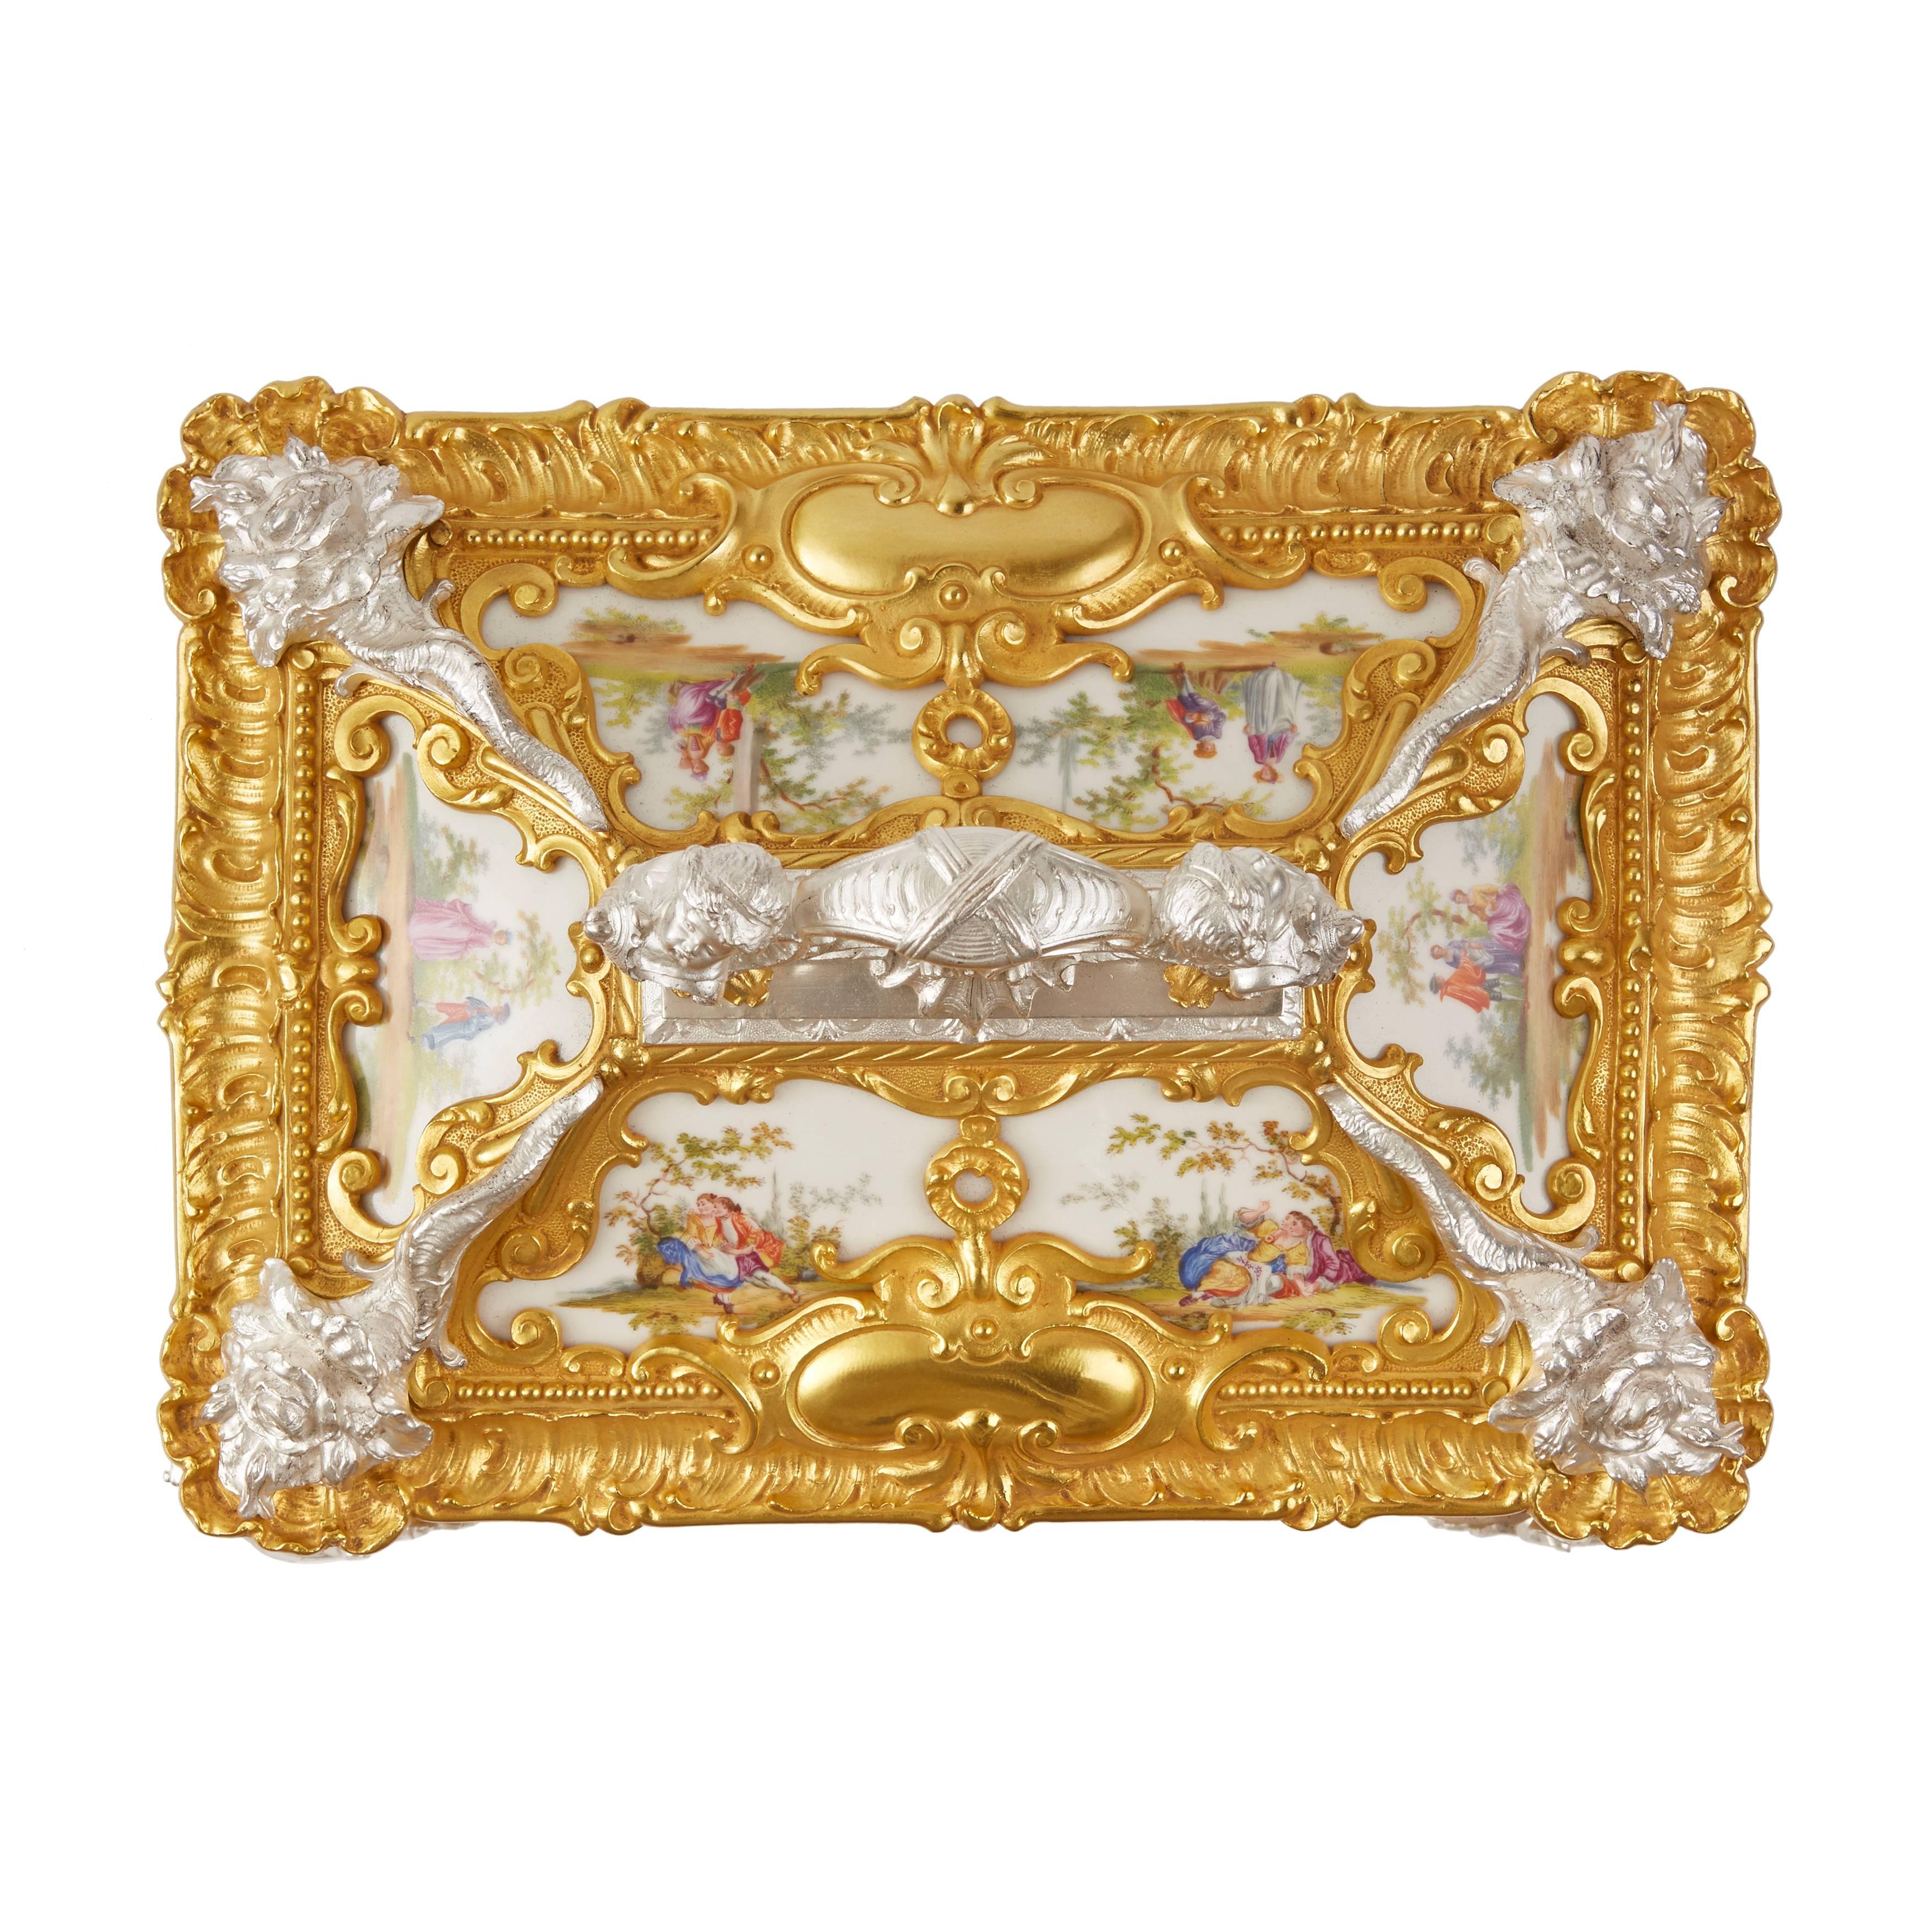 19th Century Louis XVI Style Silvered and Gilt Bronze Mounted KPM Porcelain Casket